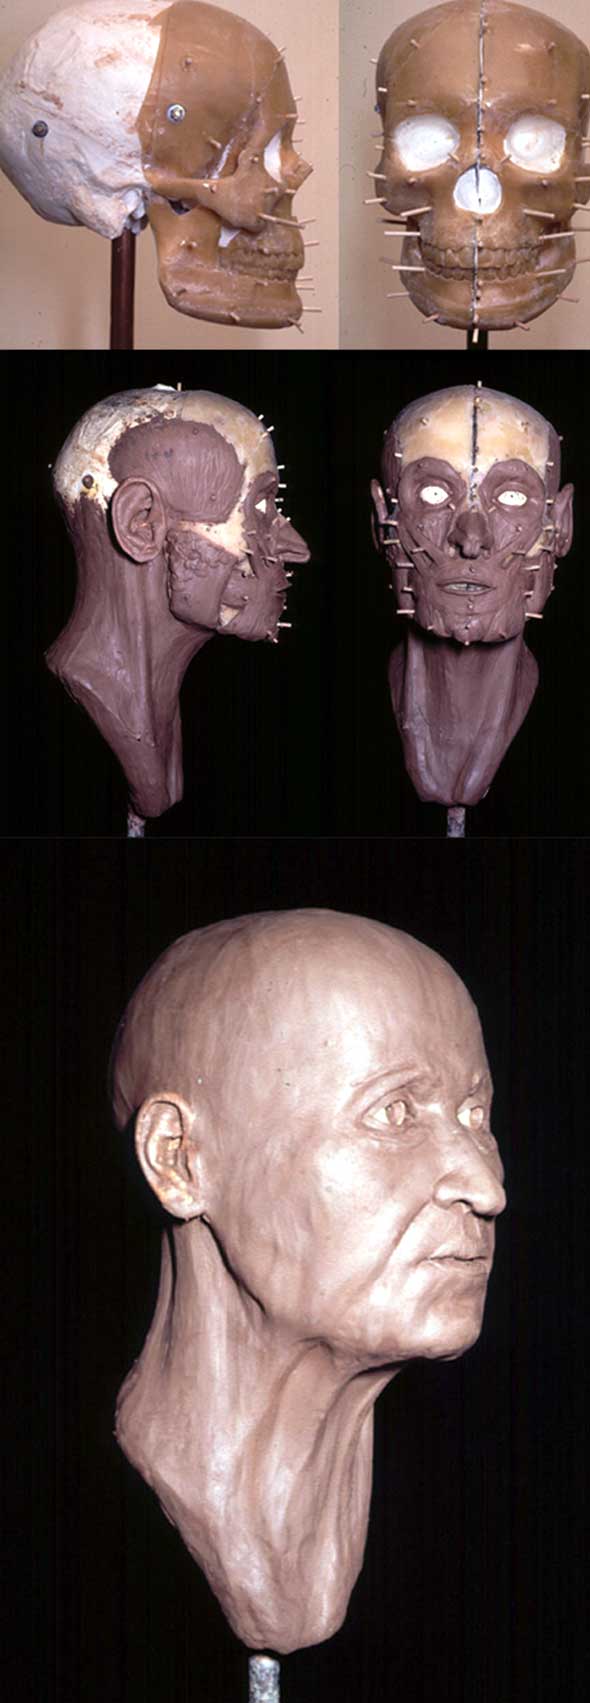 Large size of Figure 2B. Photographs detailing the reconstruction process of an older human. Top: lateral and frontal skull views. Middle: lateral and frontal muscle views. Bottom: finished reconstruction.